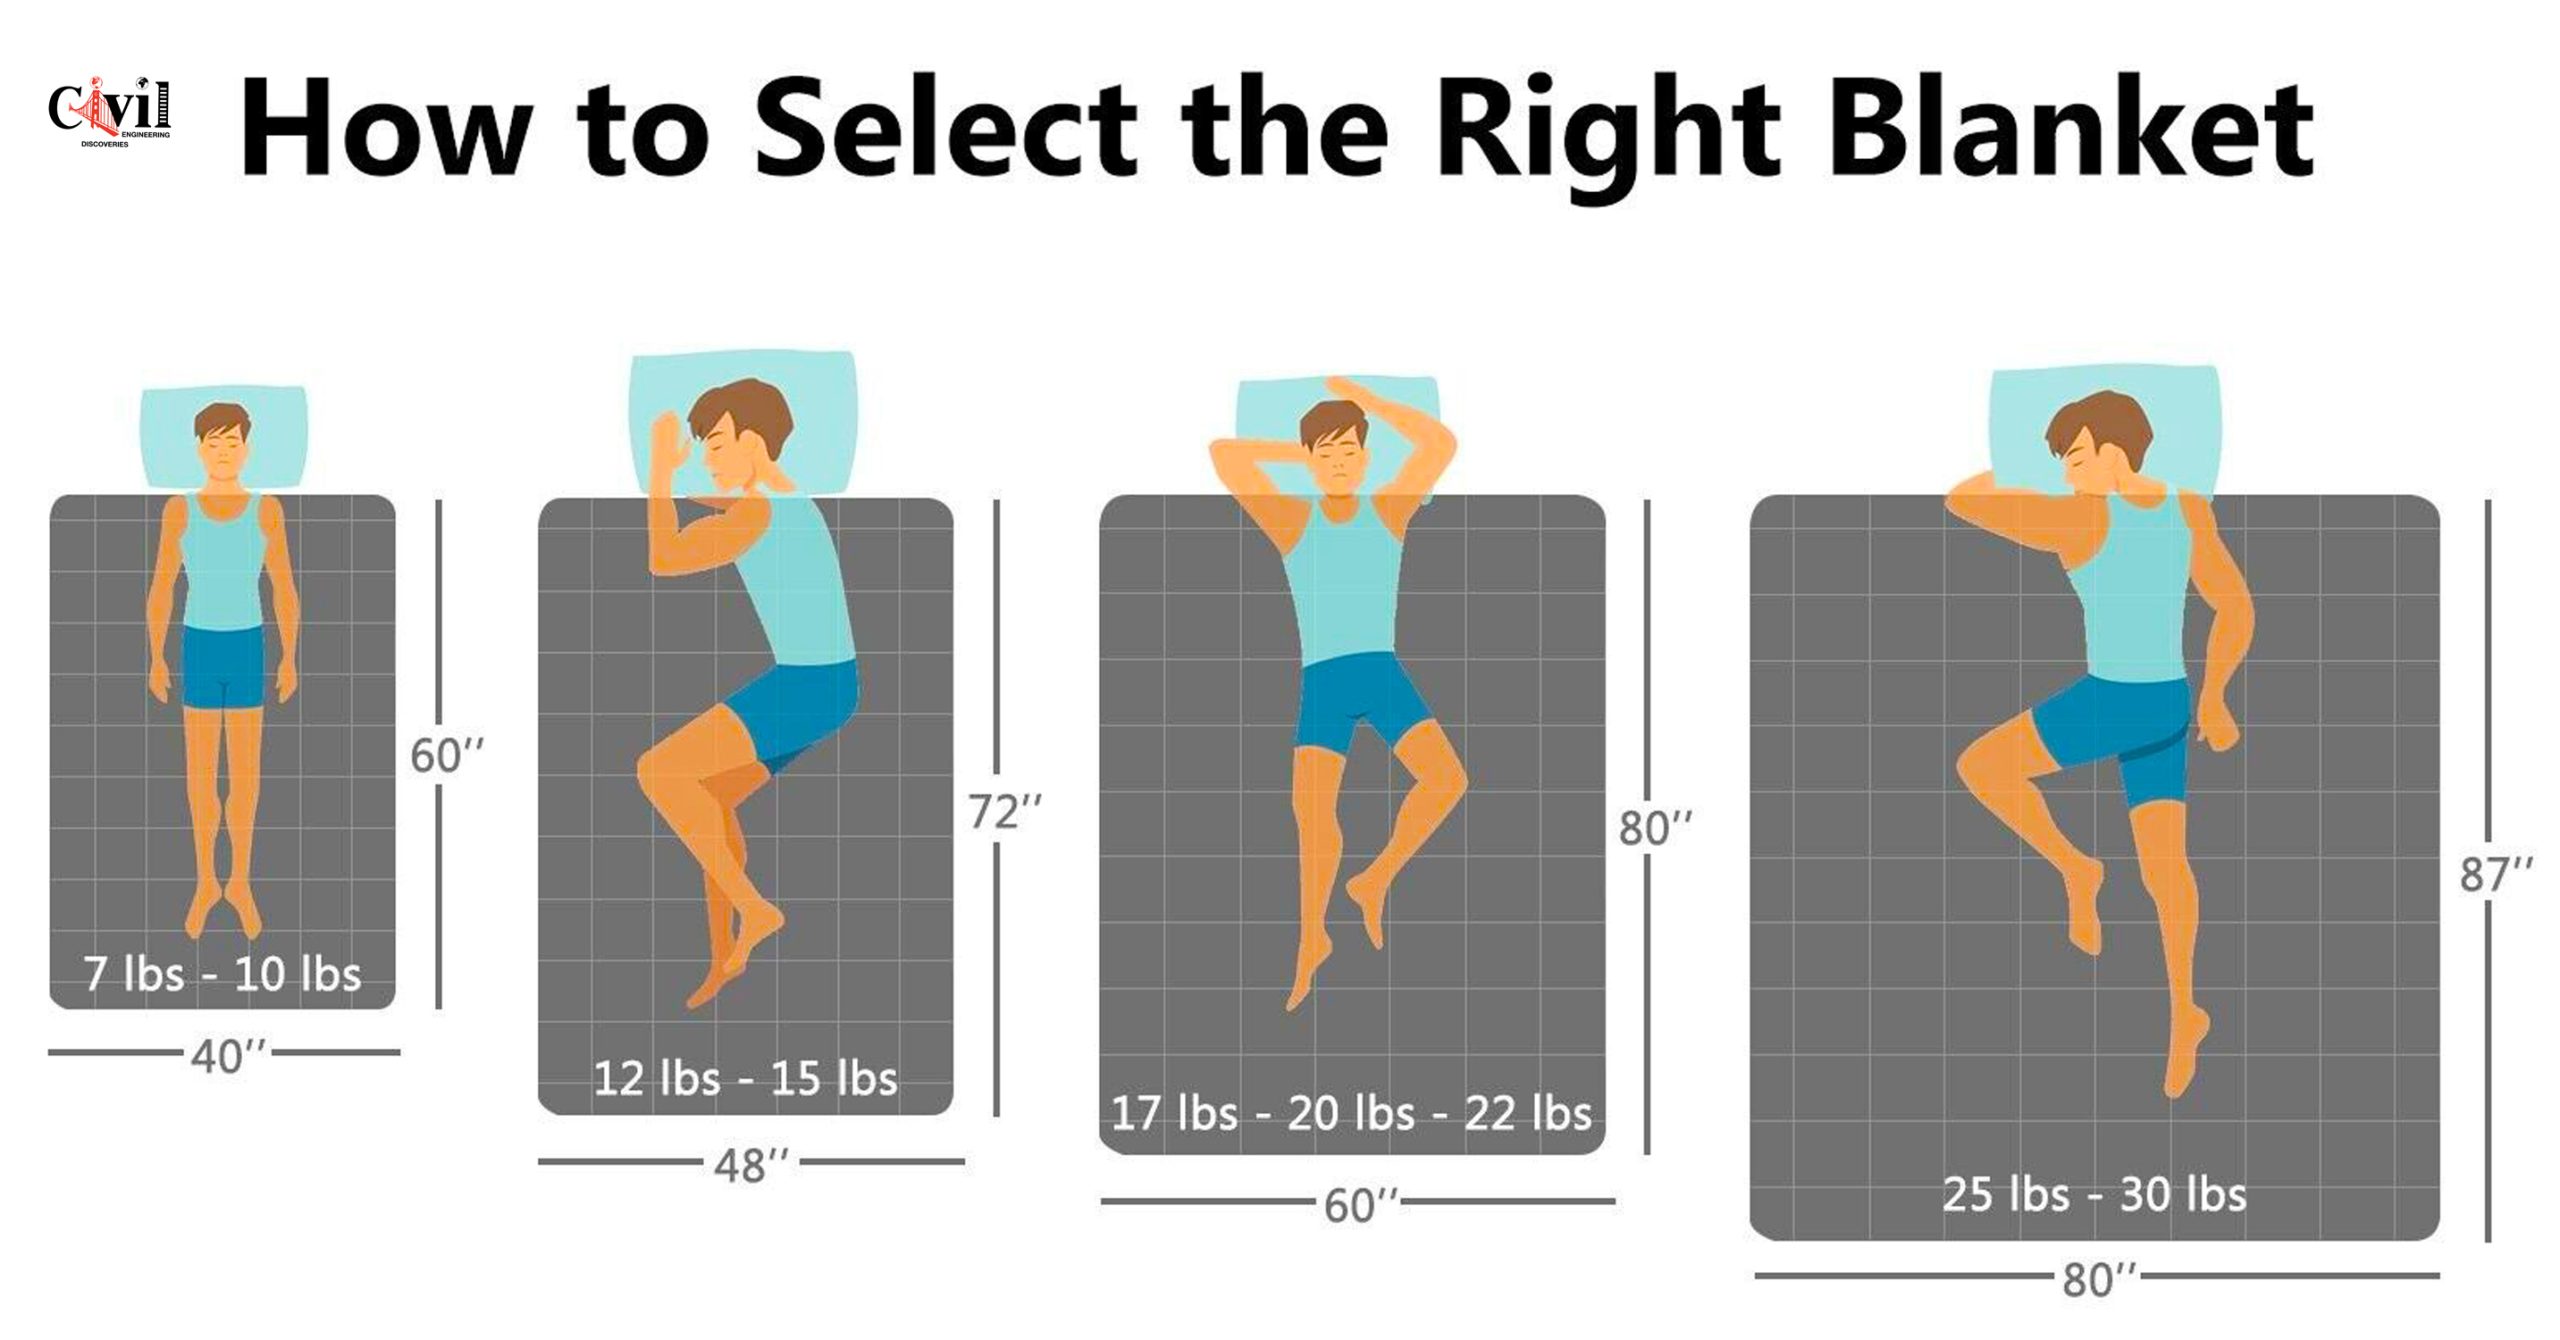 Blanket Size Chart: Guide to Blanket Sizes and Dimensions